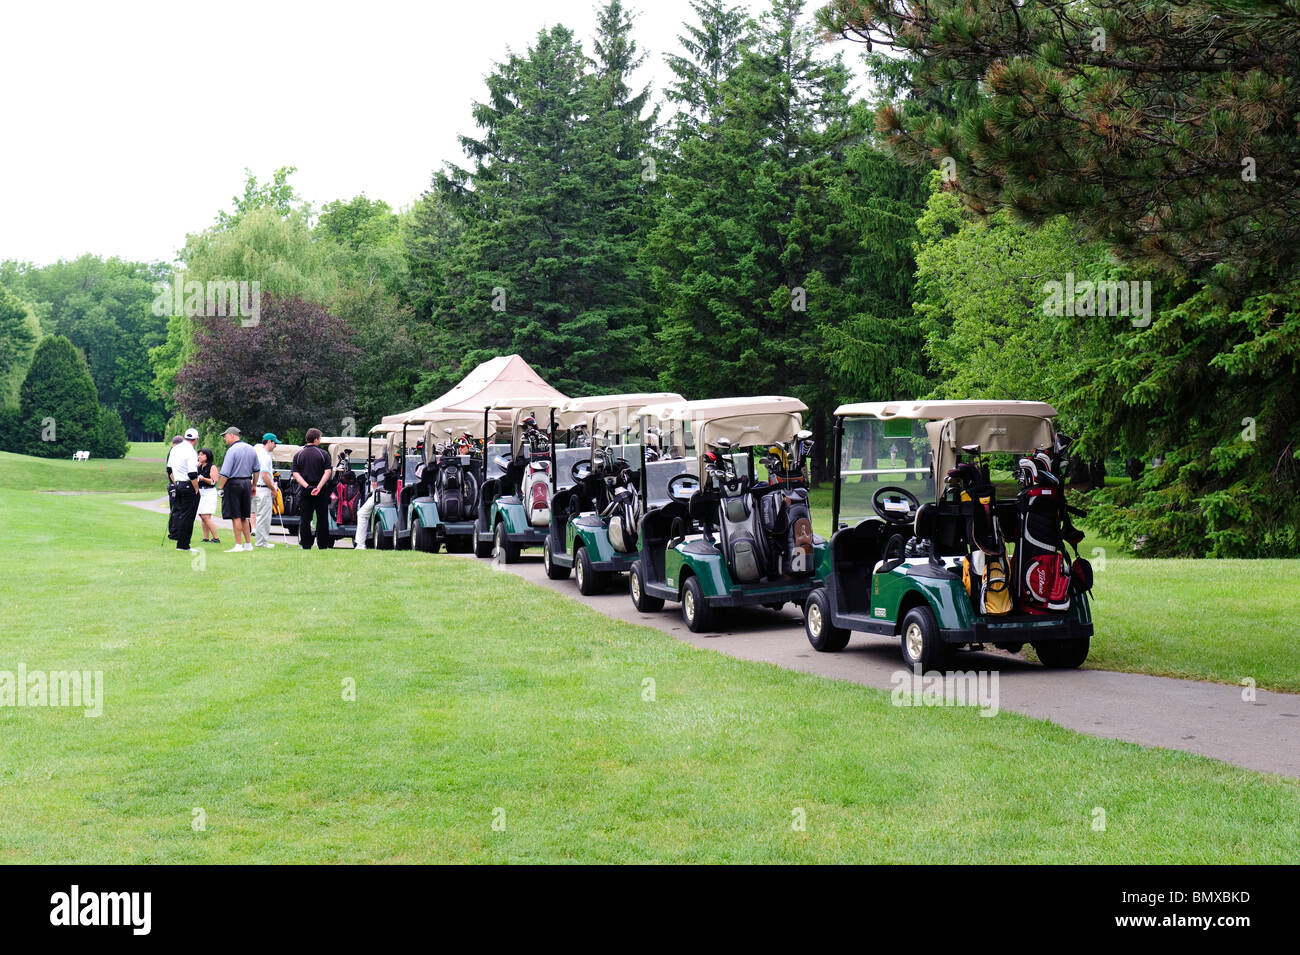 Traffic jam on the golf course: a line of carts during a corporate event. Stock Photo